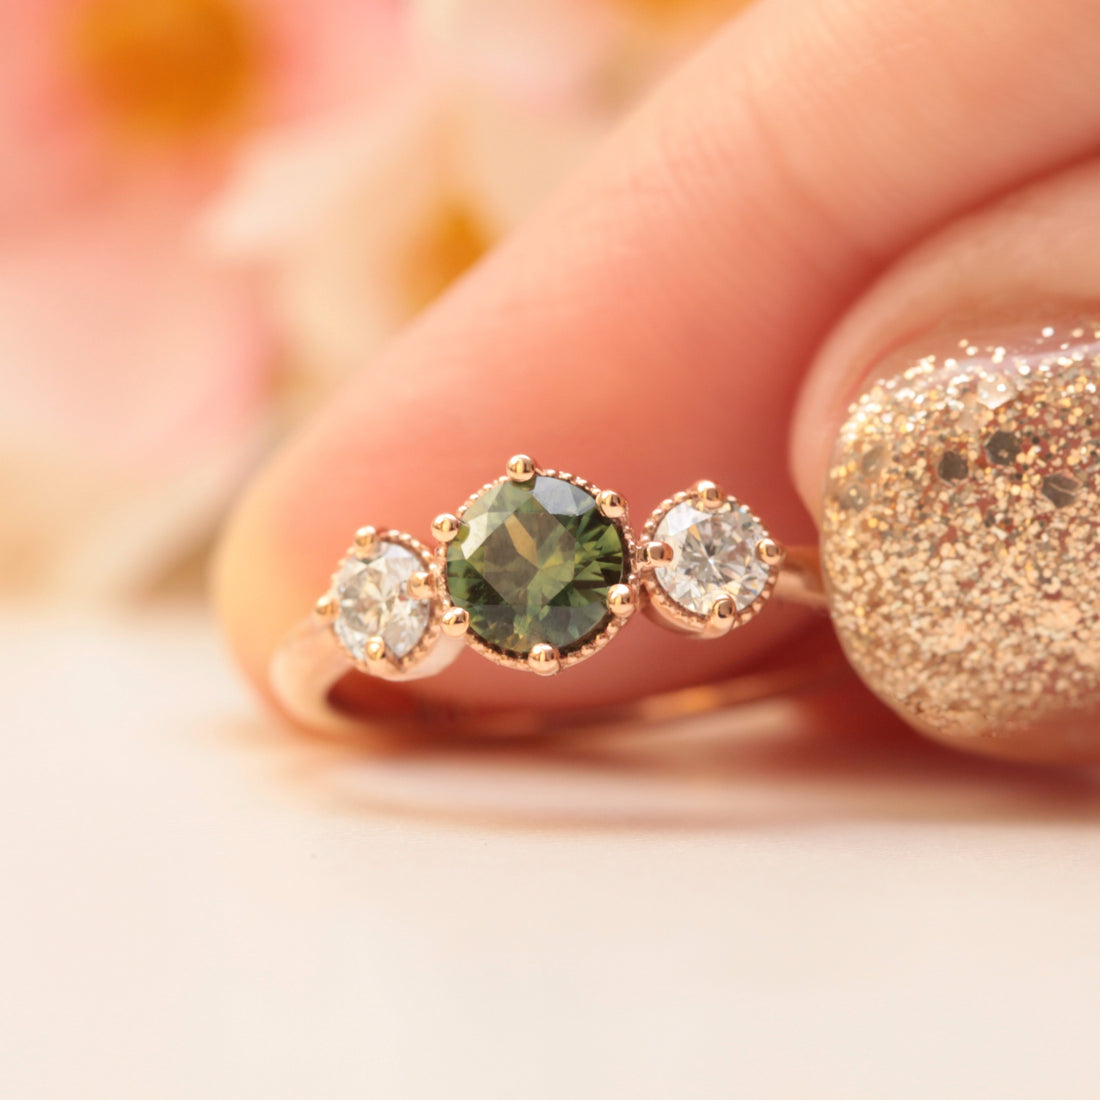 Green Sapphire Engagement Rings - really?